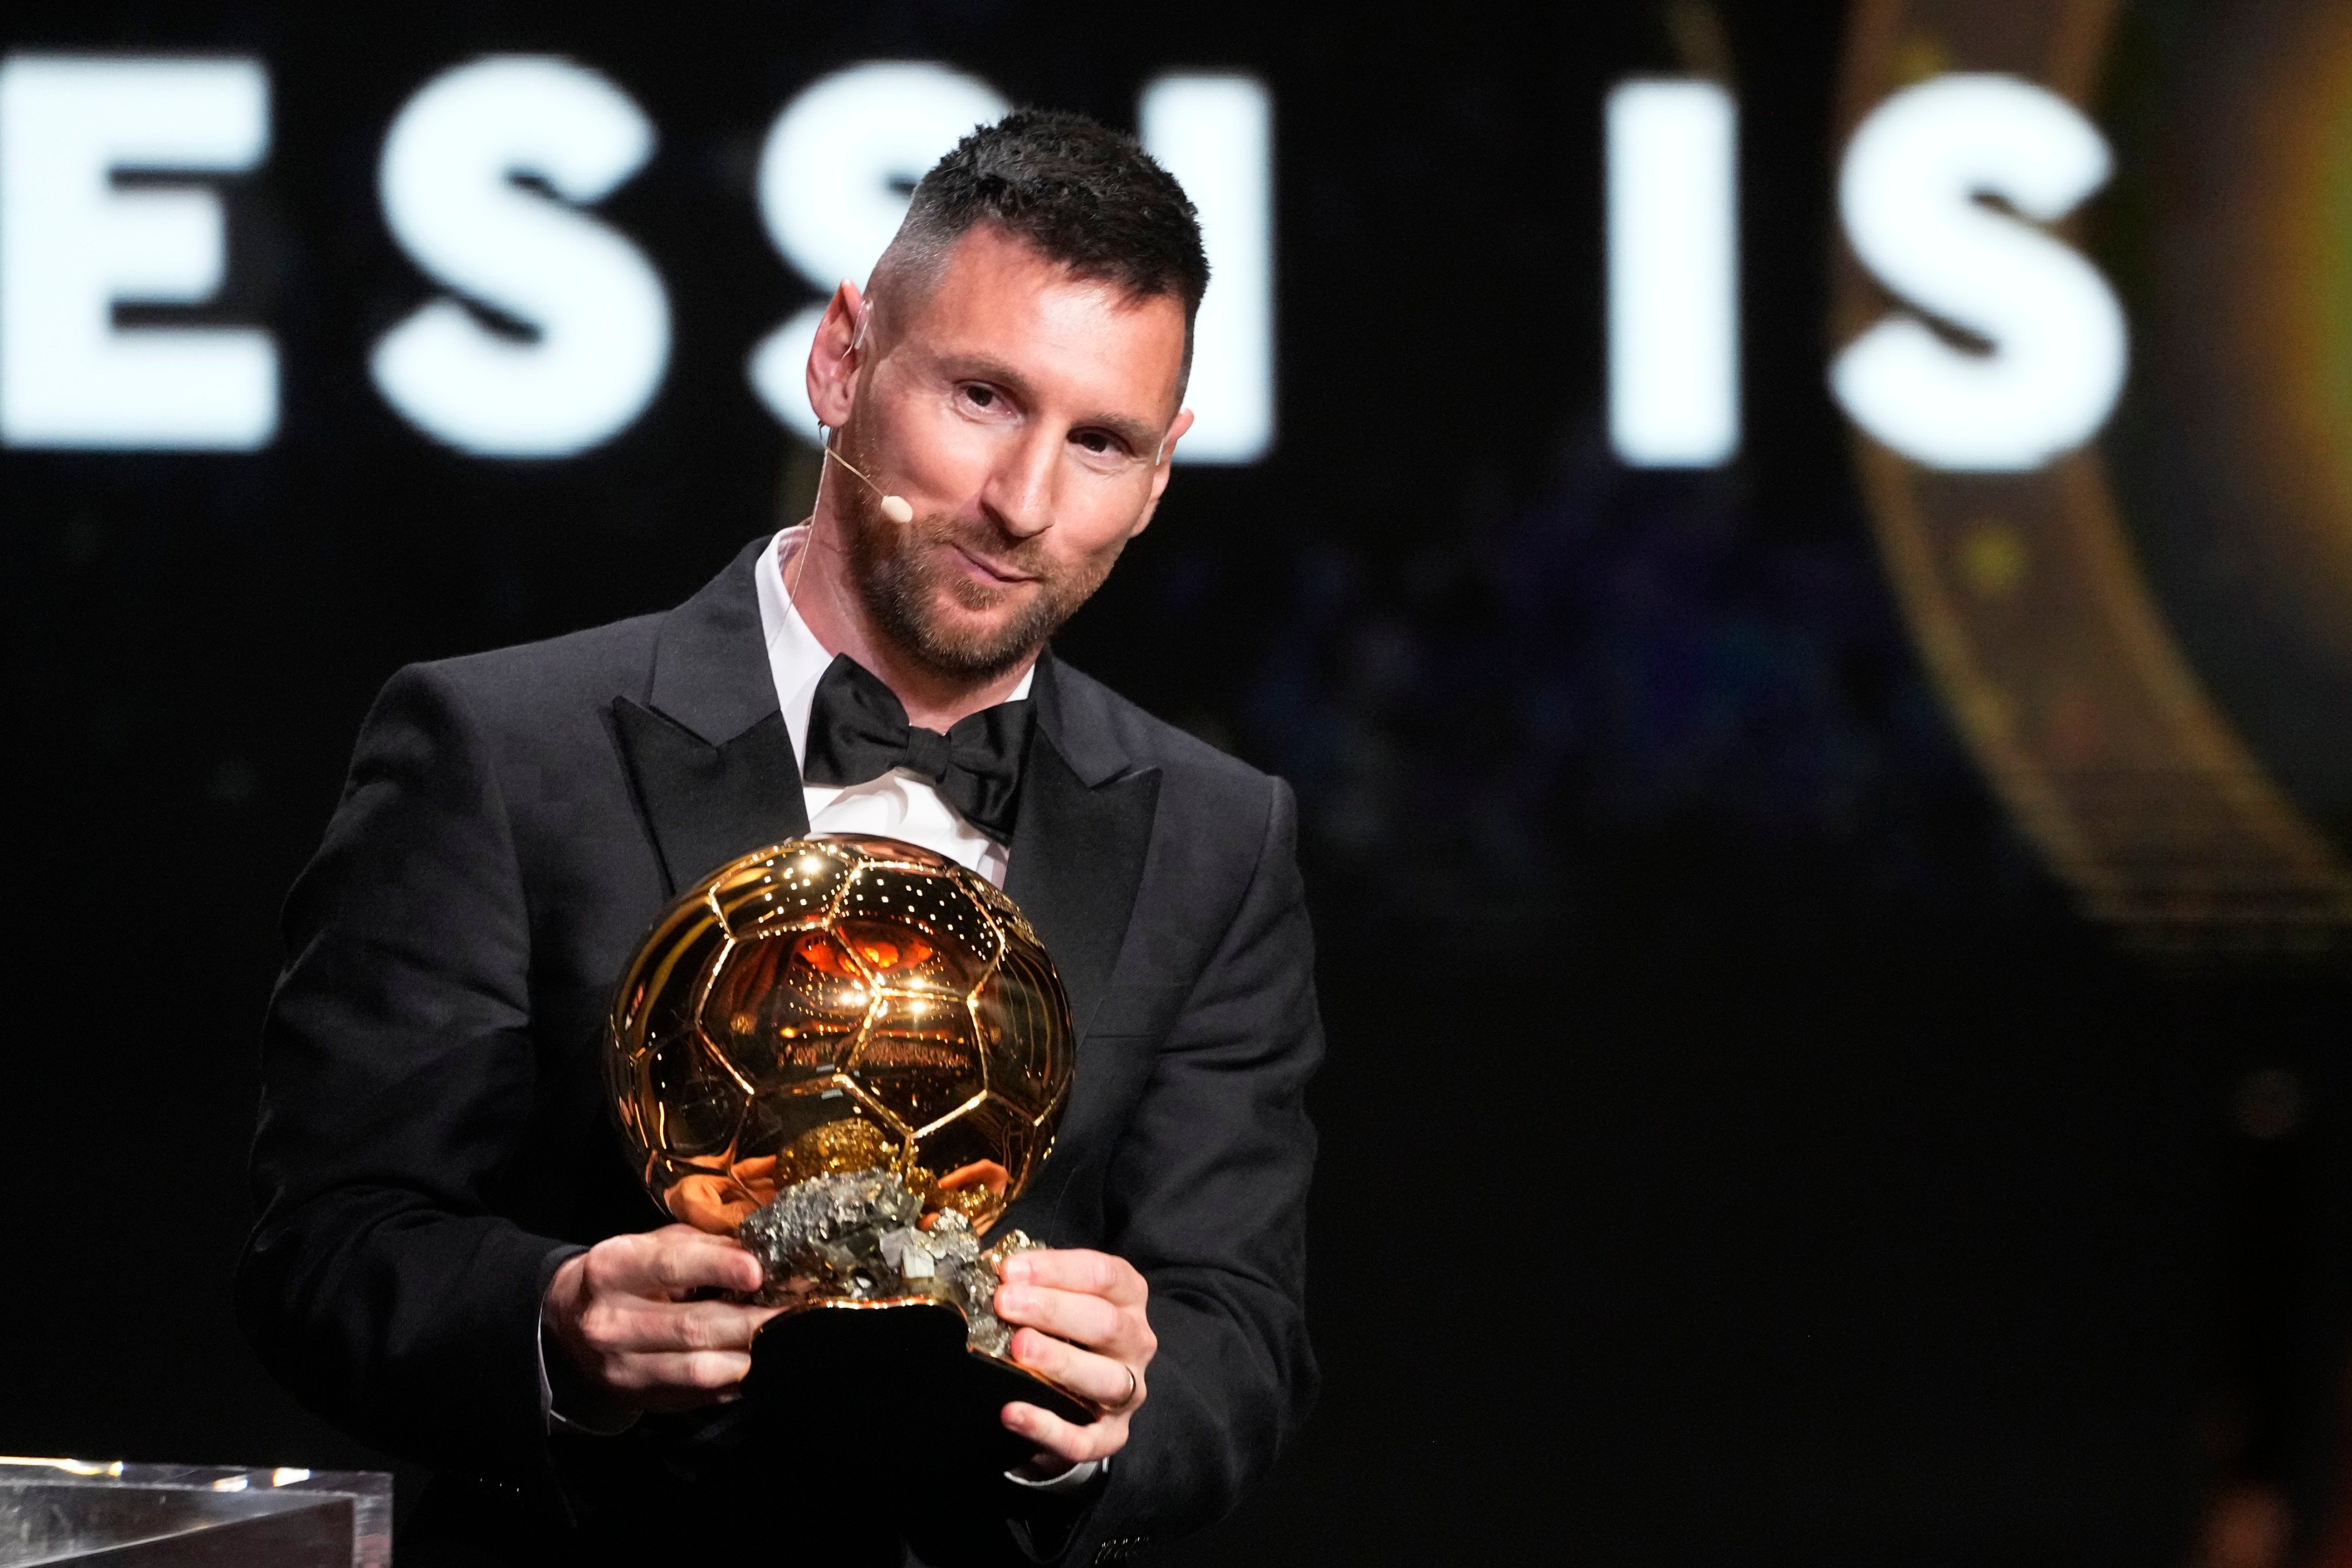 Inter Miami’s and Argentina’s national team player Lionel Messi receives the 2023 Ballon d’Or trophy in Paris. Photo: AP